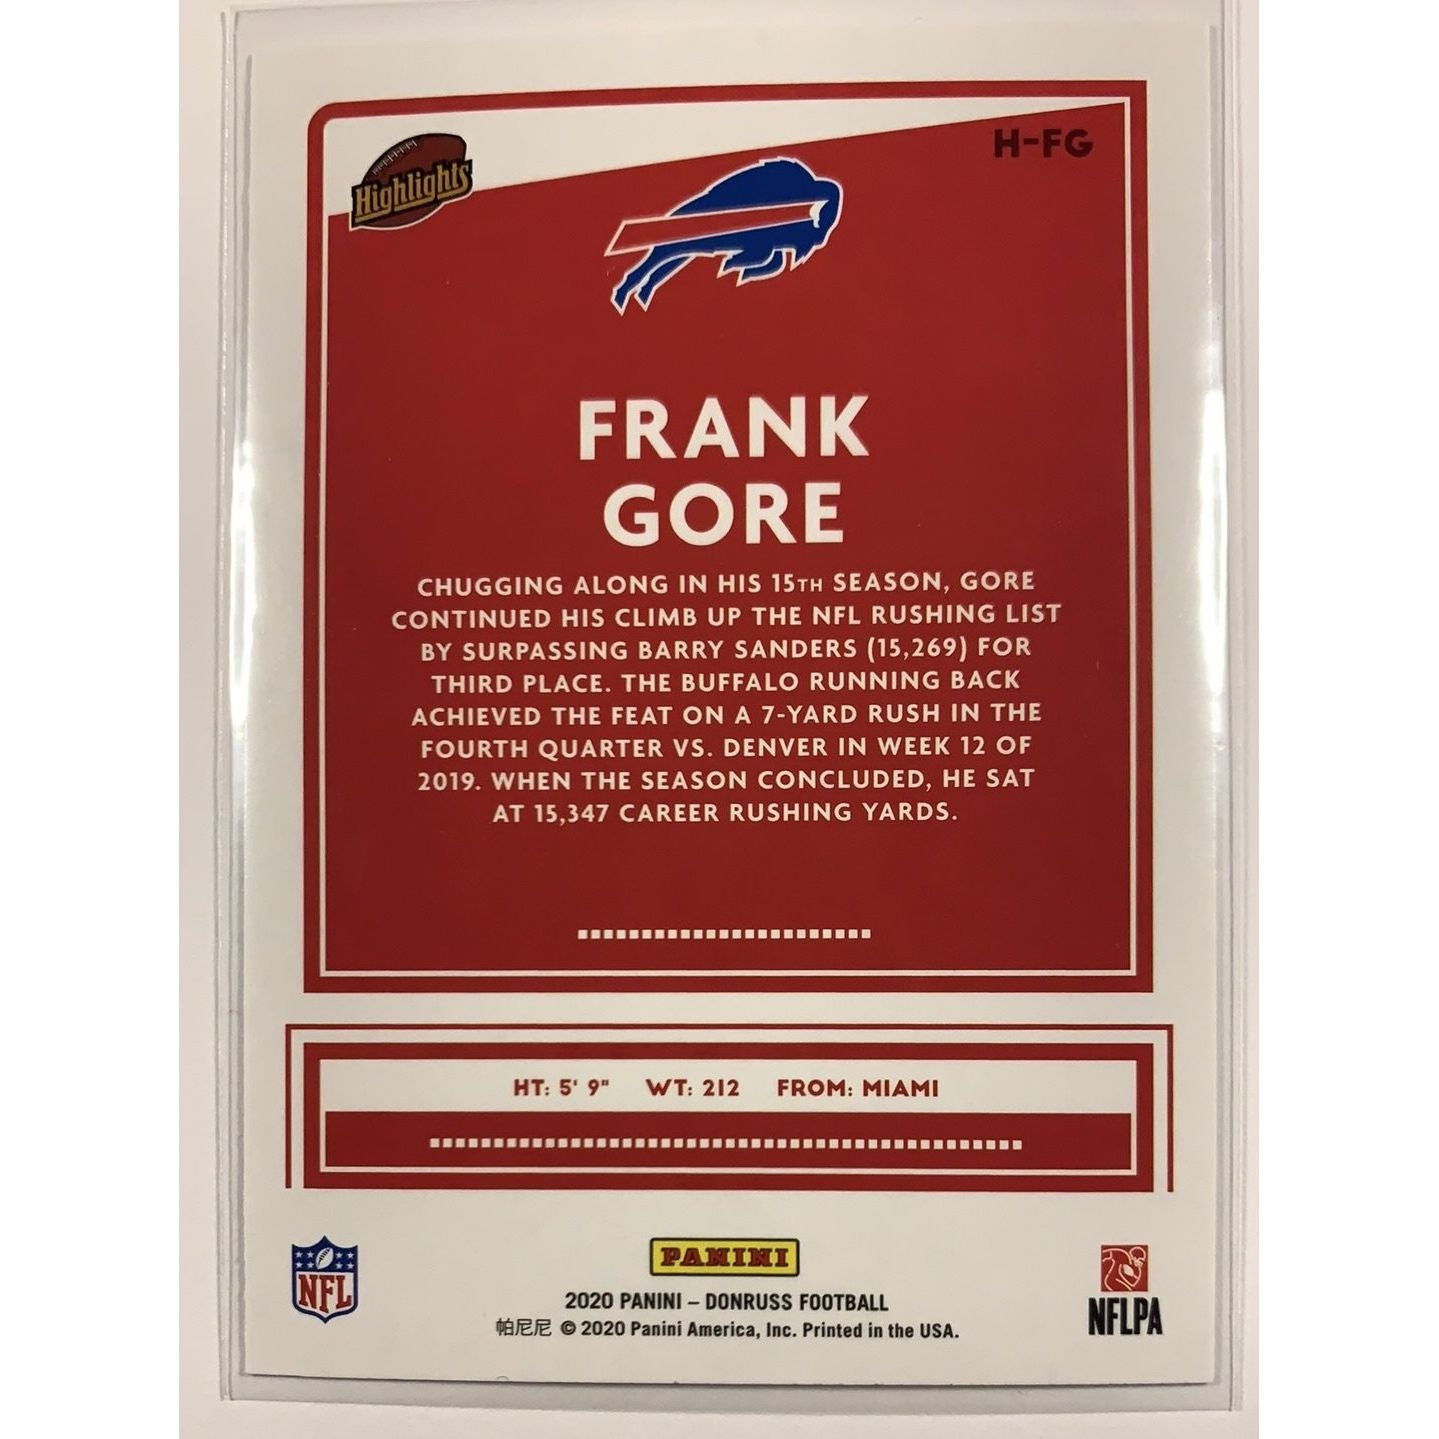  2020 Donruss Frank Gore Highlights  Local Legends Cards & Collectibles